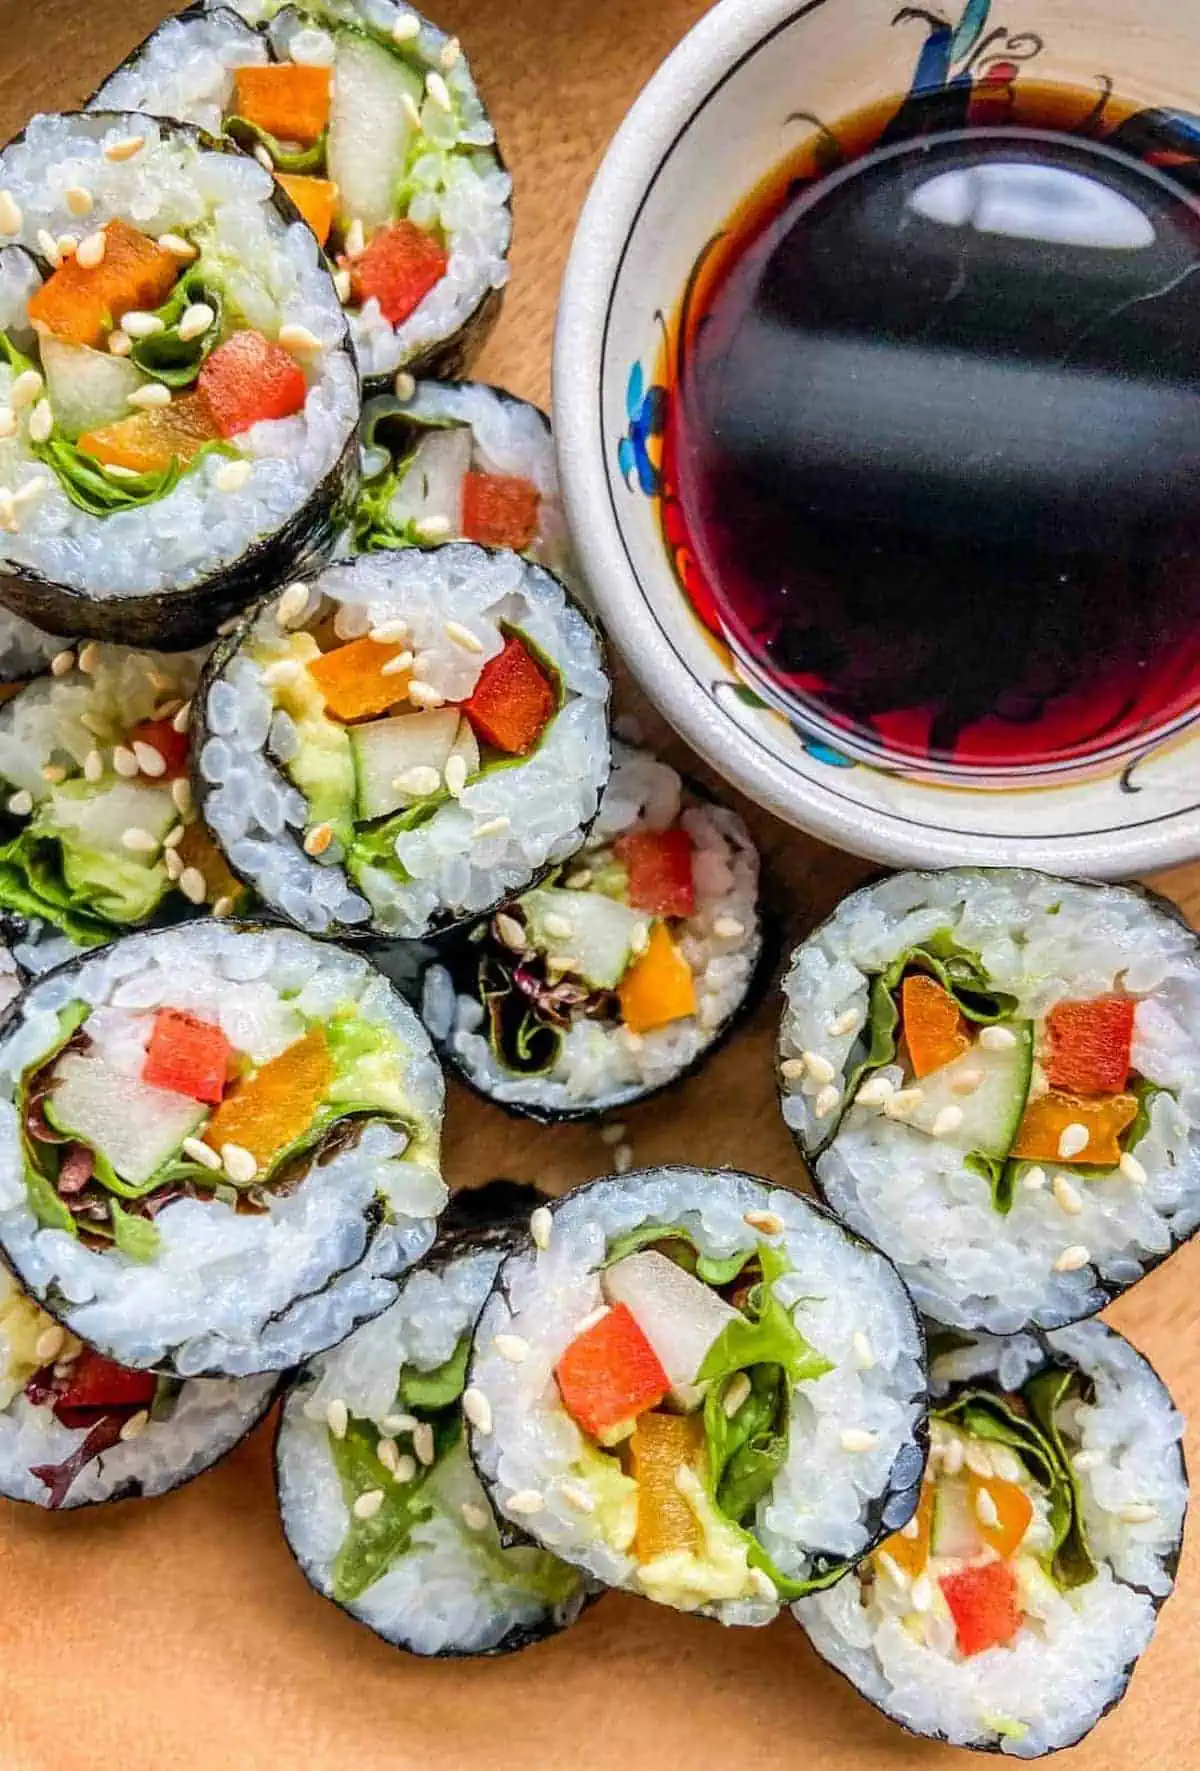 A plate of easy-to-make vegetable maki rolls.